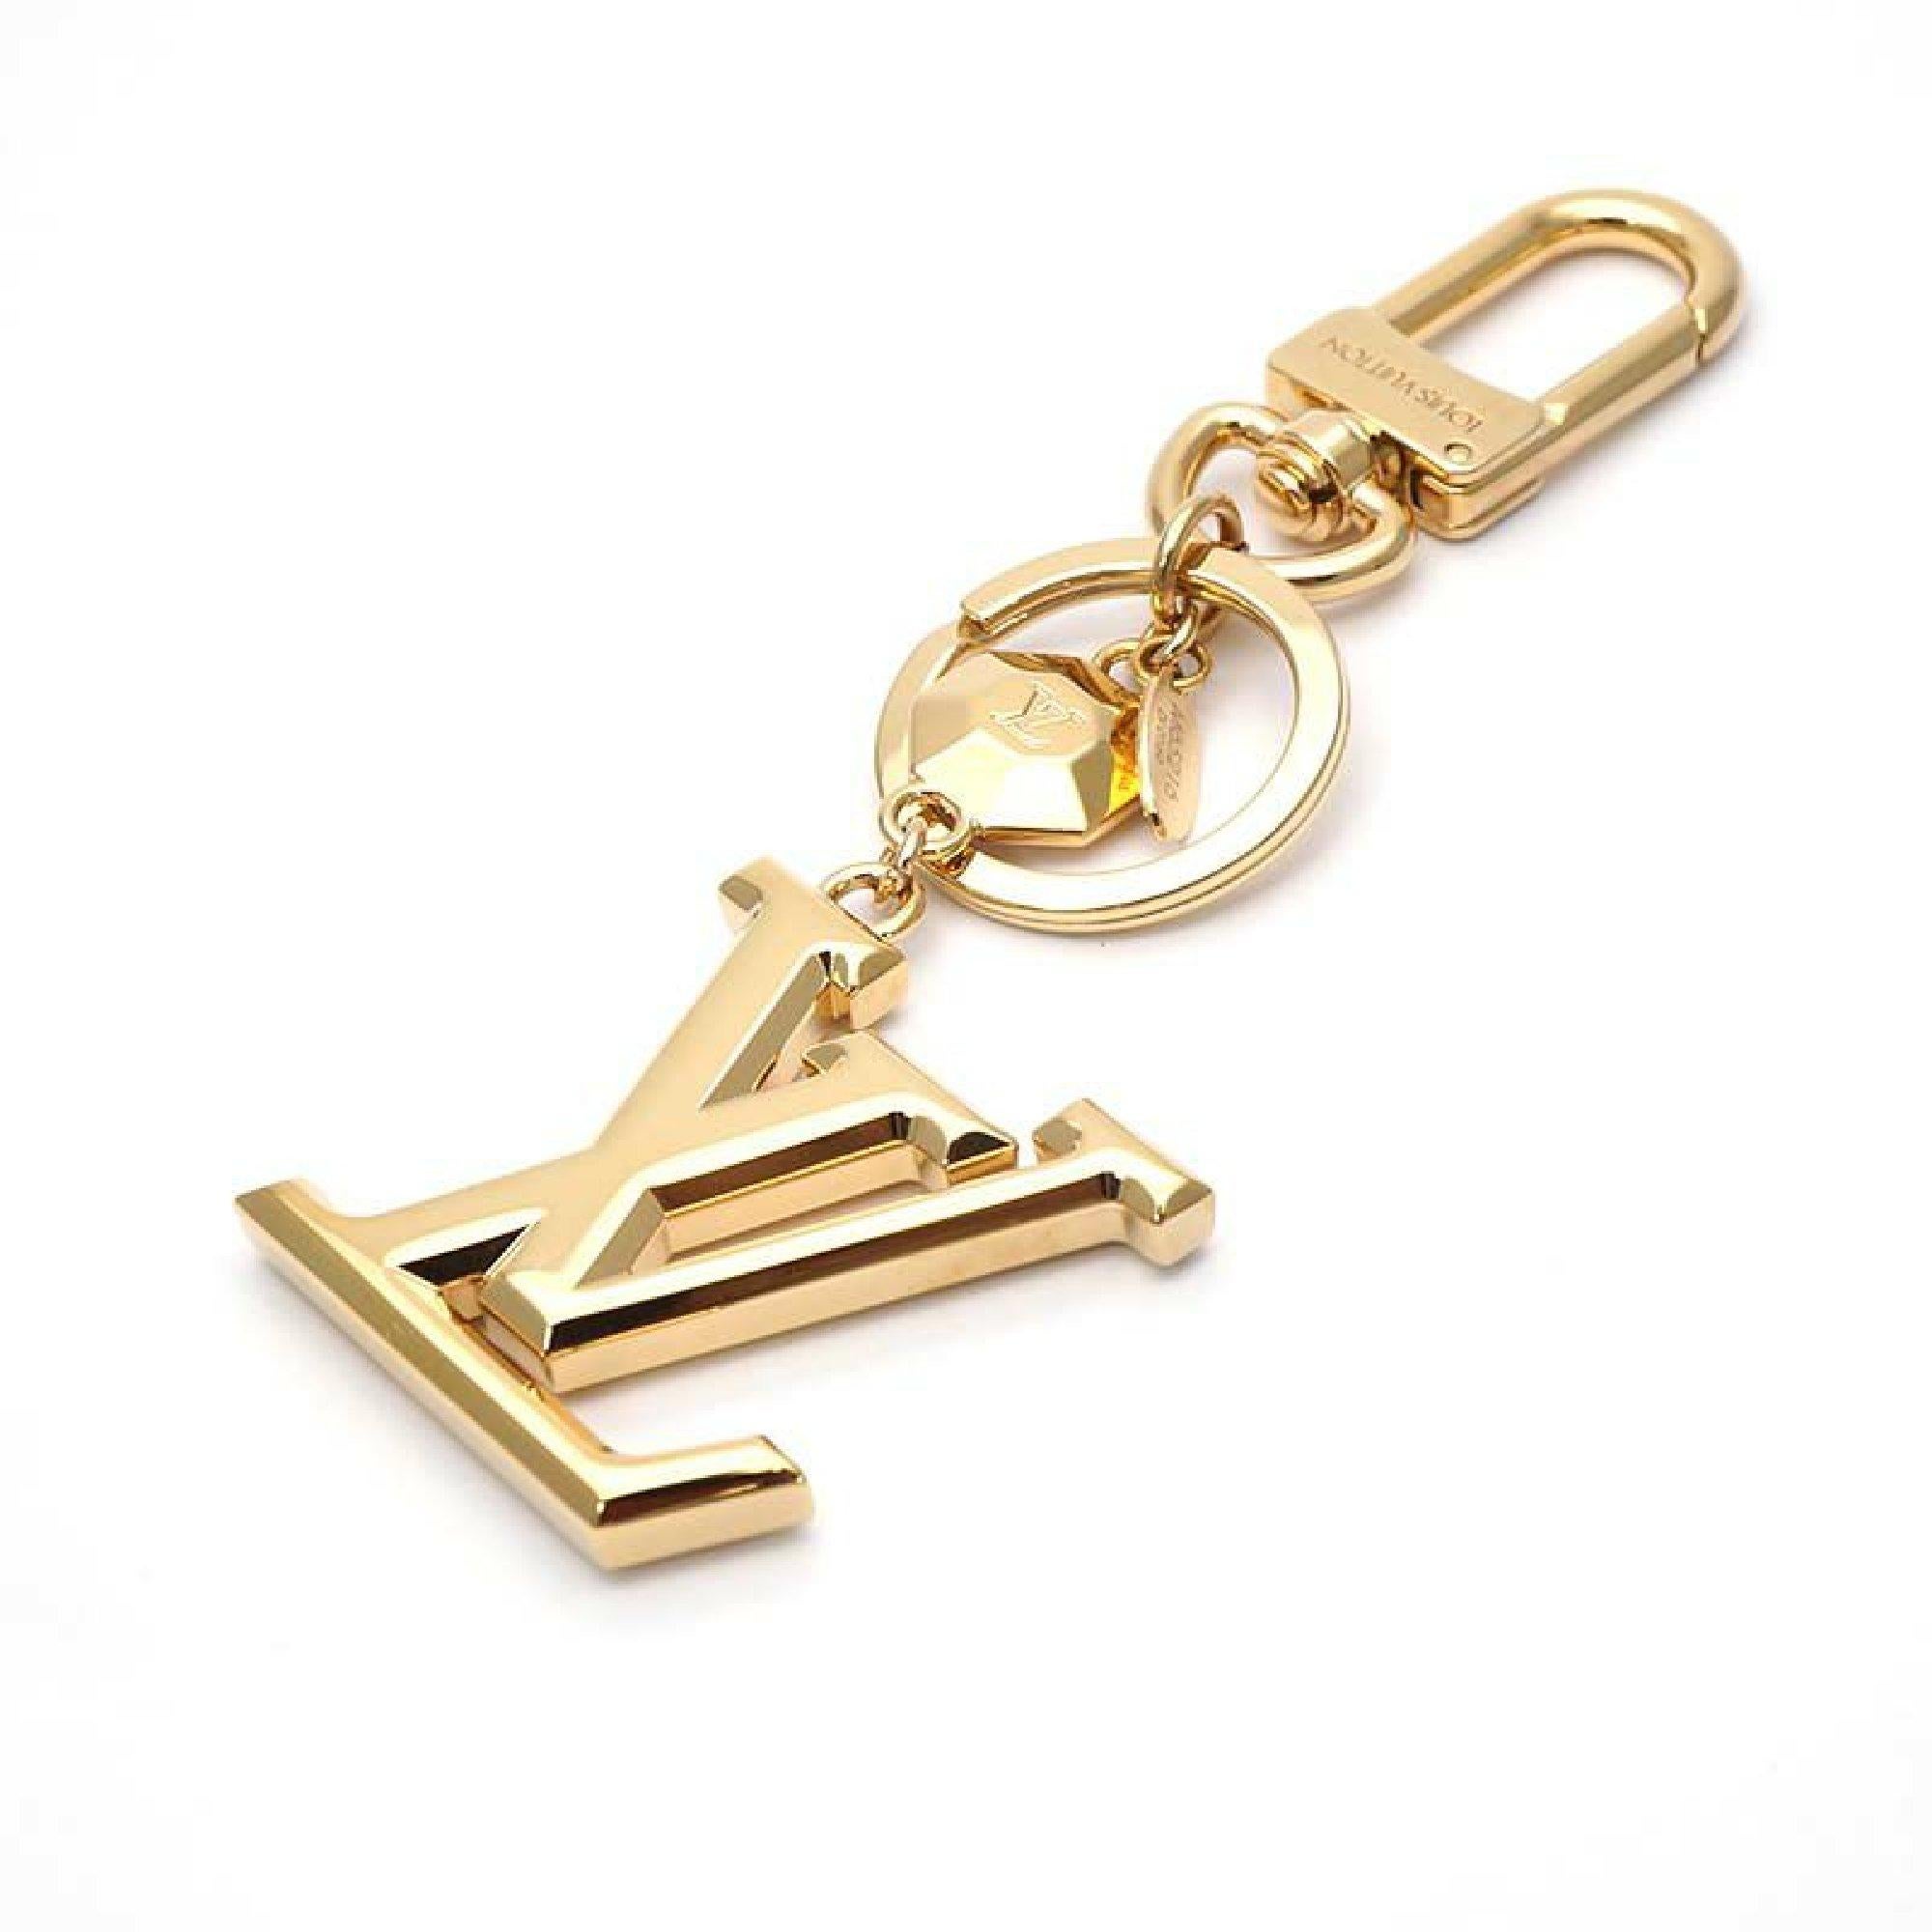 An authentic LOUIS VUITTON poruto Cle LV facet charm unisex key holder M65216 gold. The color is Gold. The outside material is GP. The pattern is poruto Cle LV  facet  charm.
Rank
AB signs of wear (Small)
Used products in good condition with signs